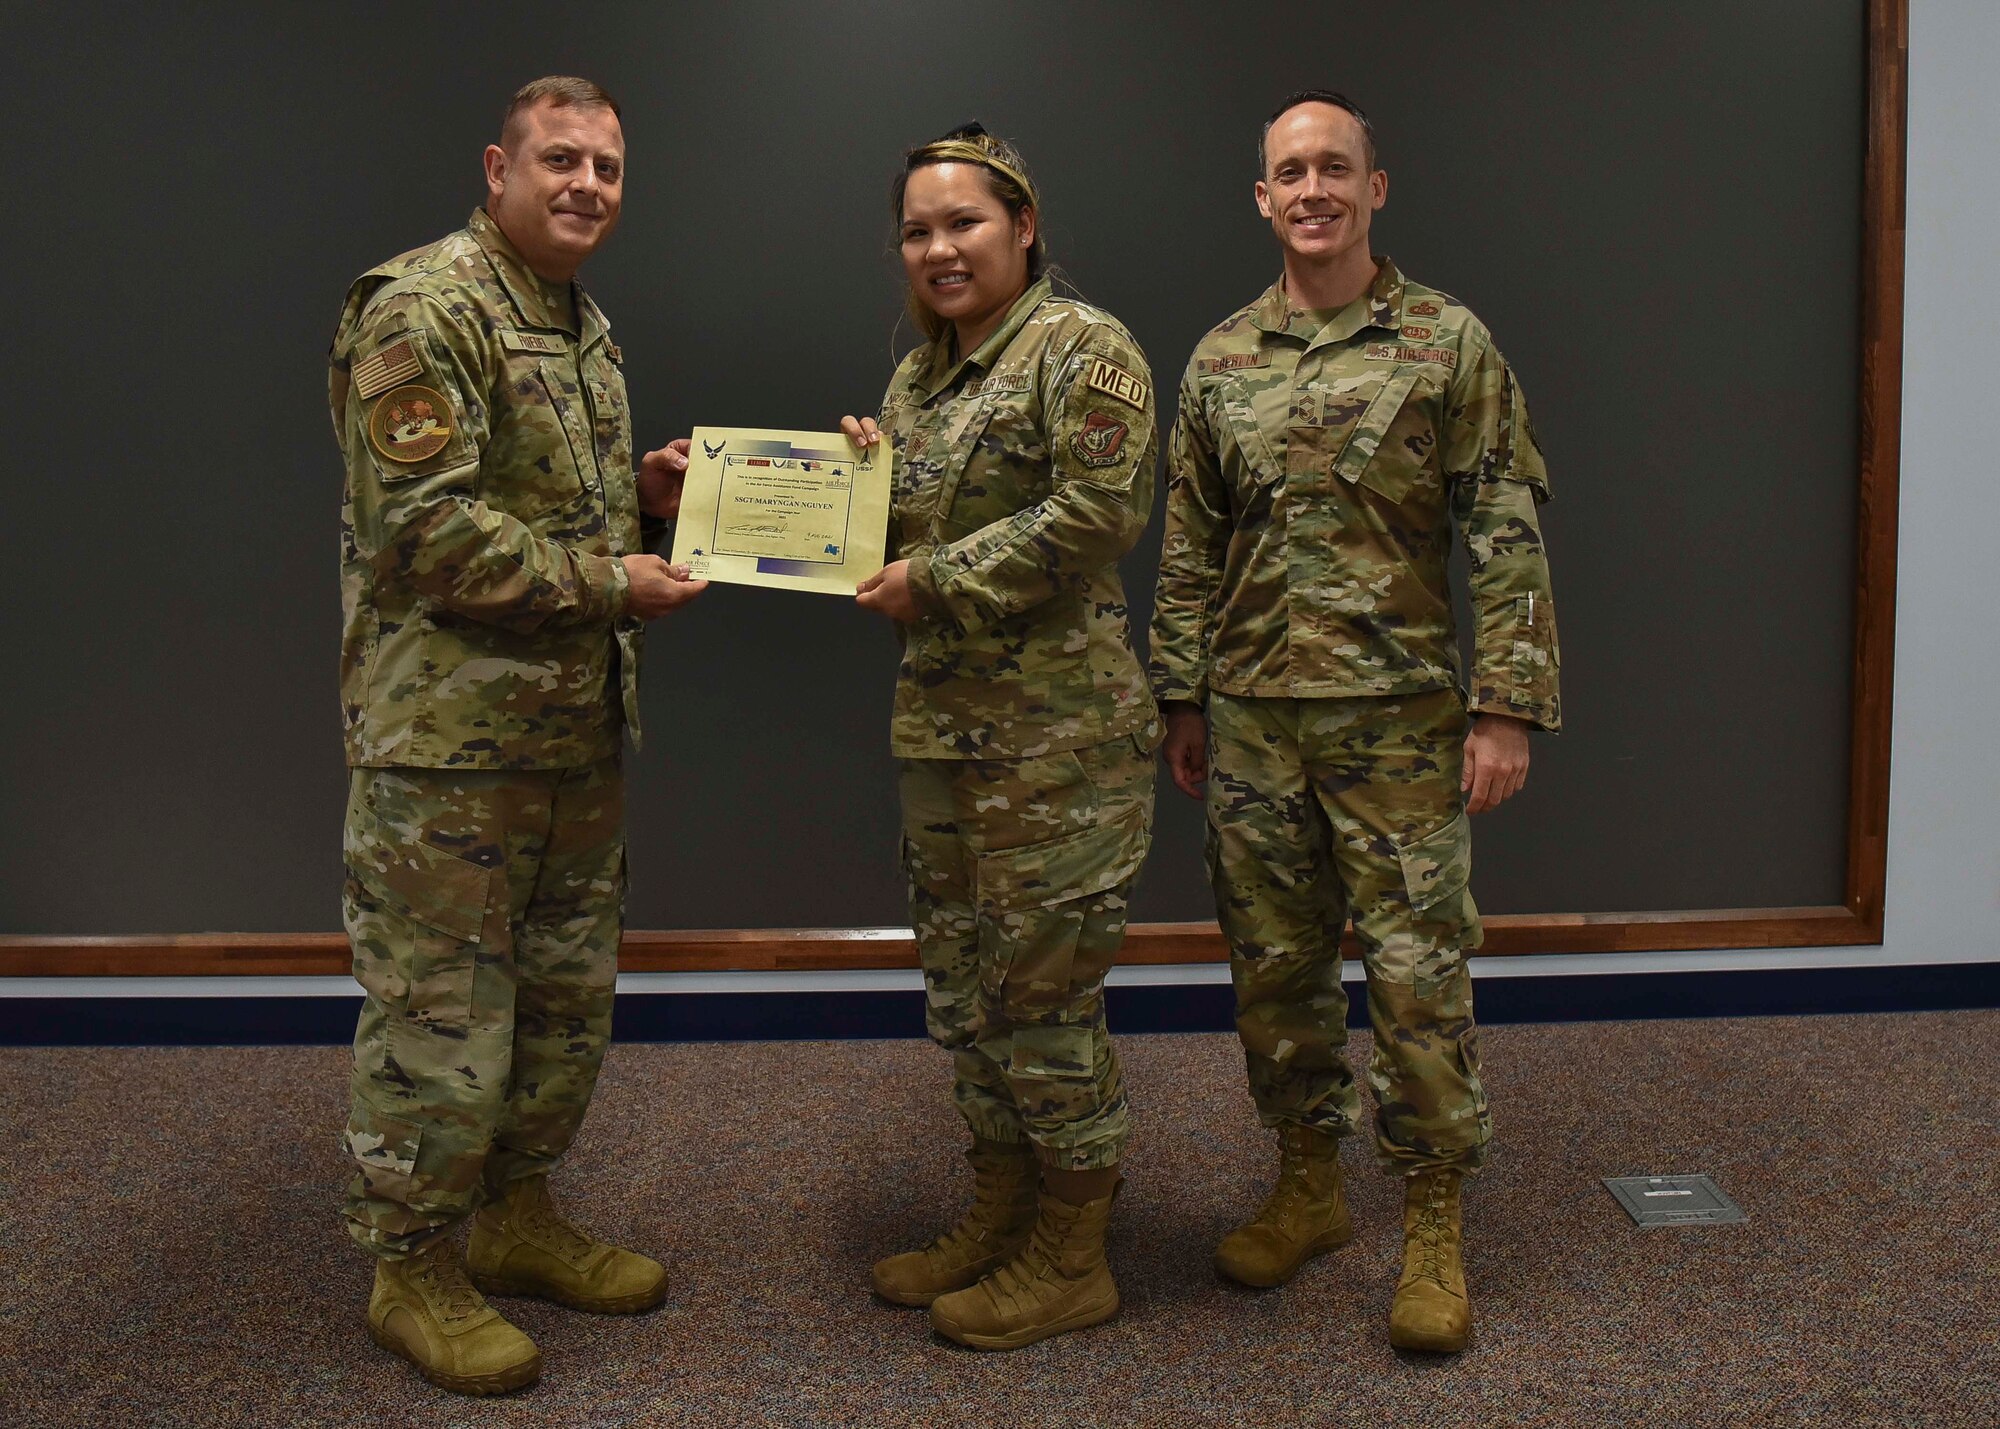 Three military members pose for a picture while the left one awards the center member.